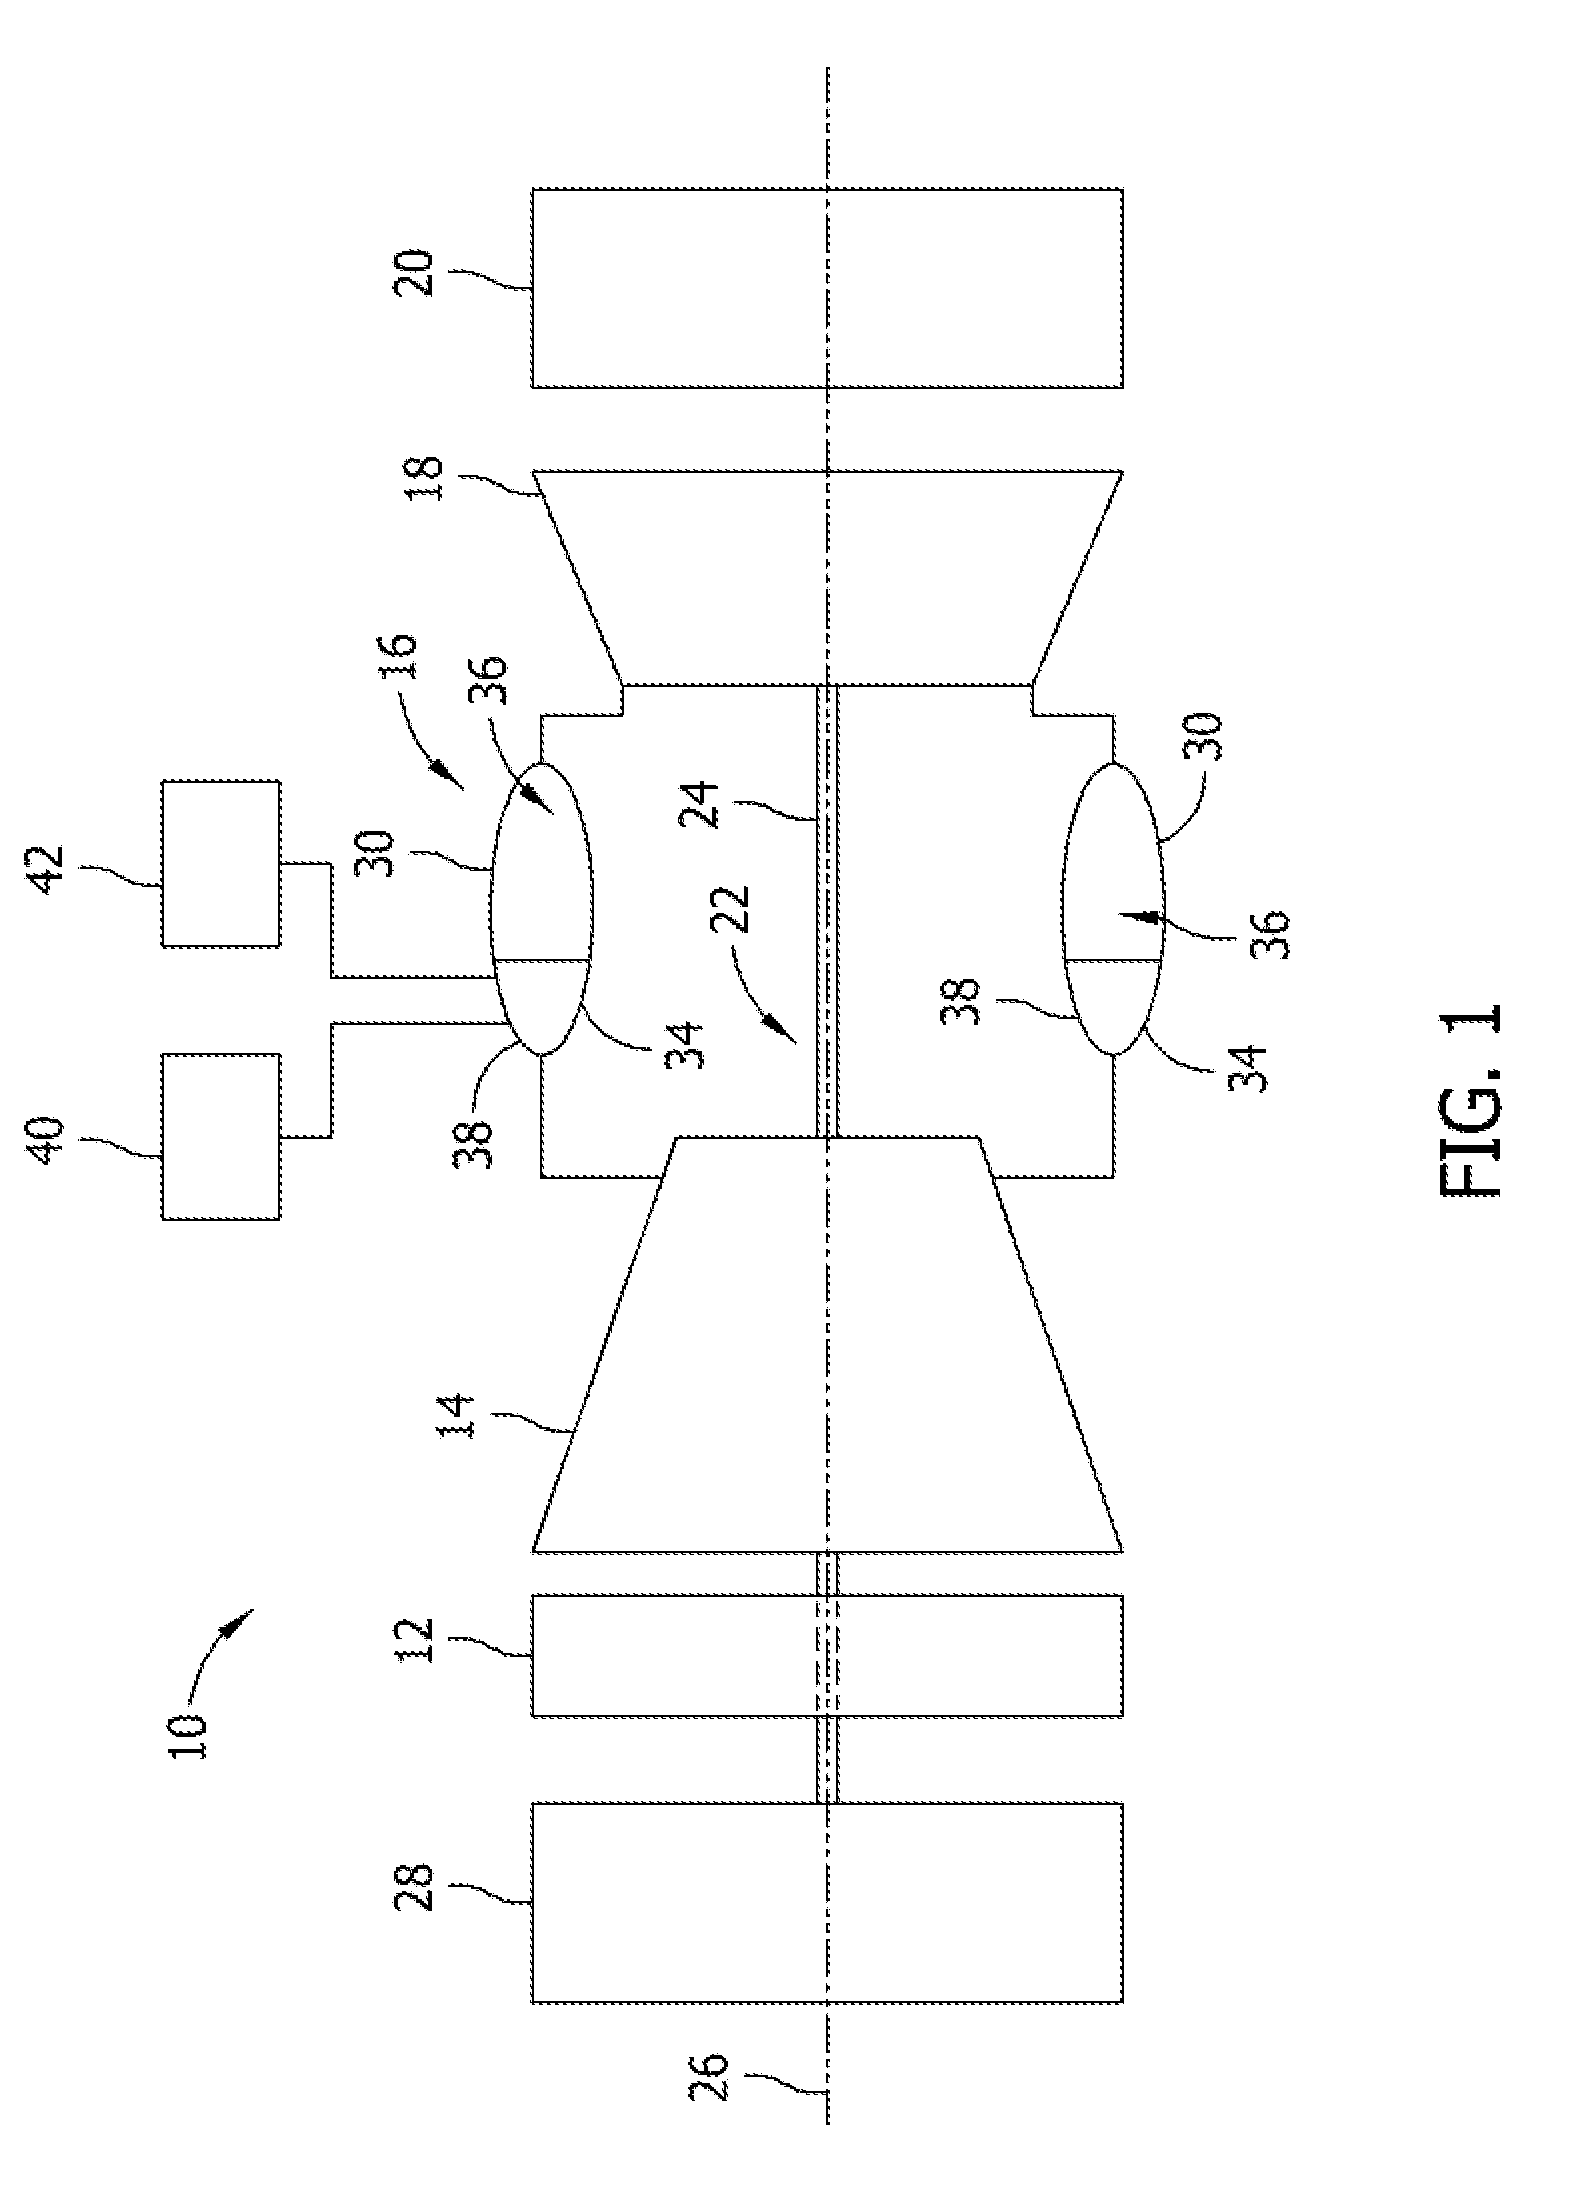 Combustor assembly for use in a turbine engine and methods of assembling same